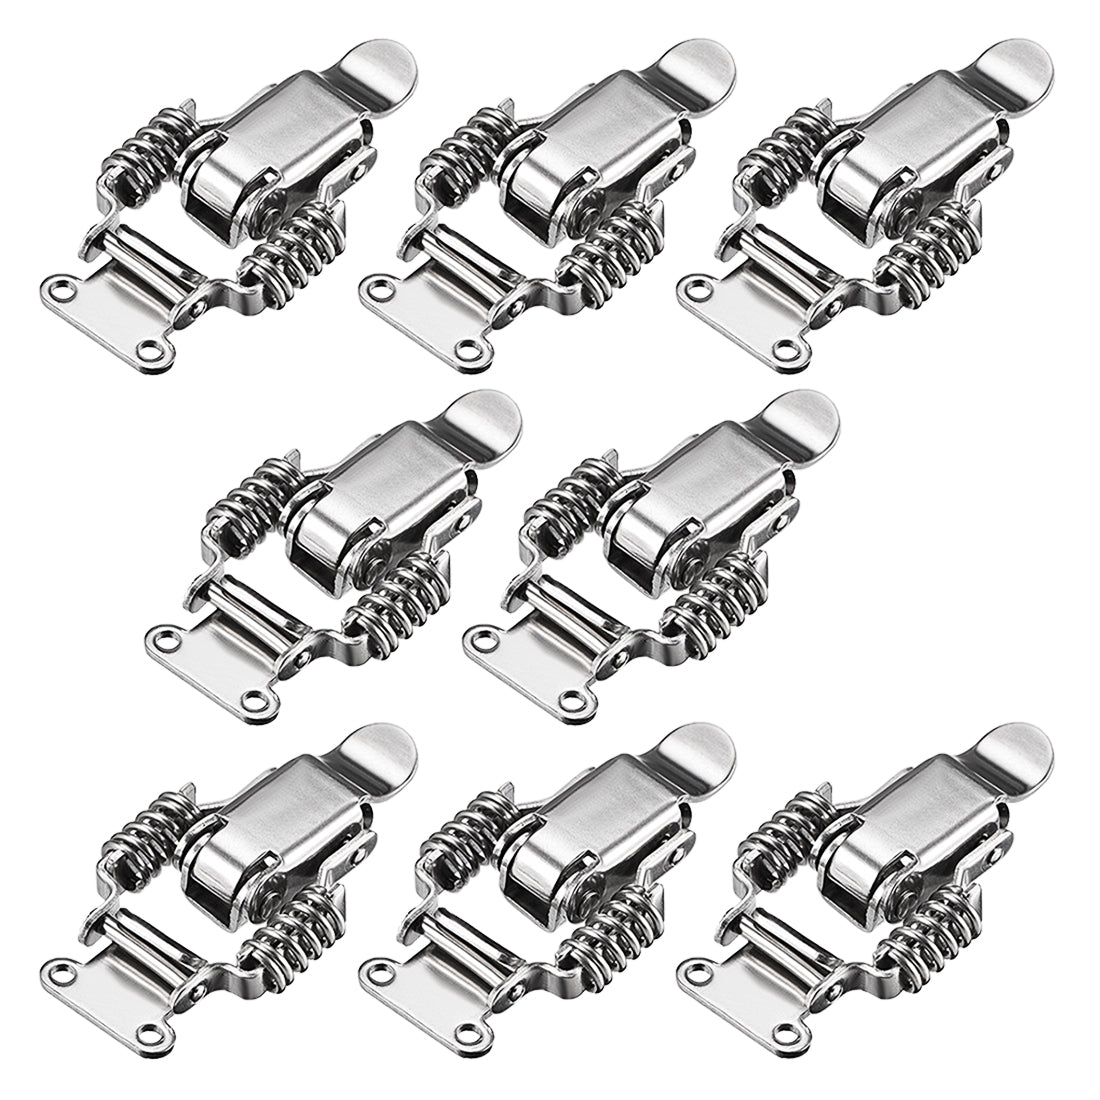 uxcell Uxcell 8pcs 304 Stainless Steel Spring Loaded Toggle Latch Catch Clamp 68mm